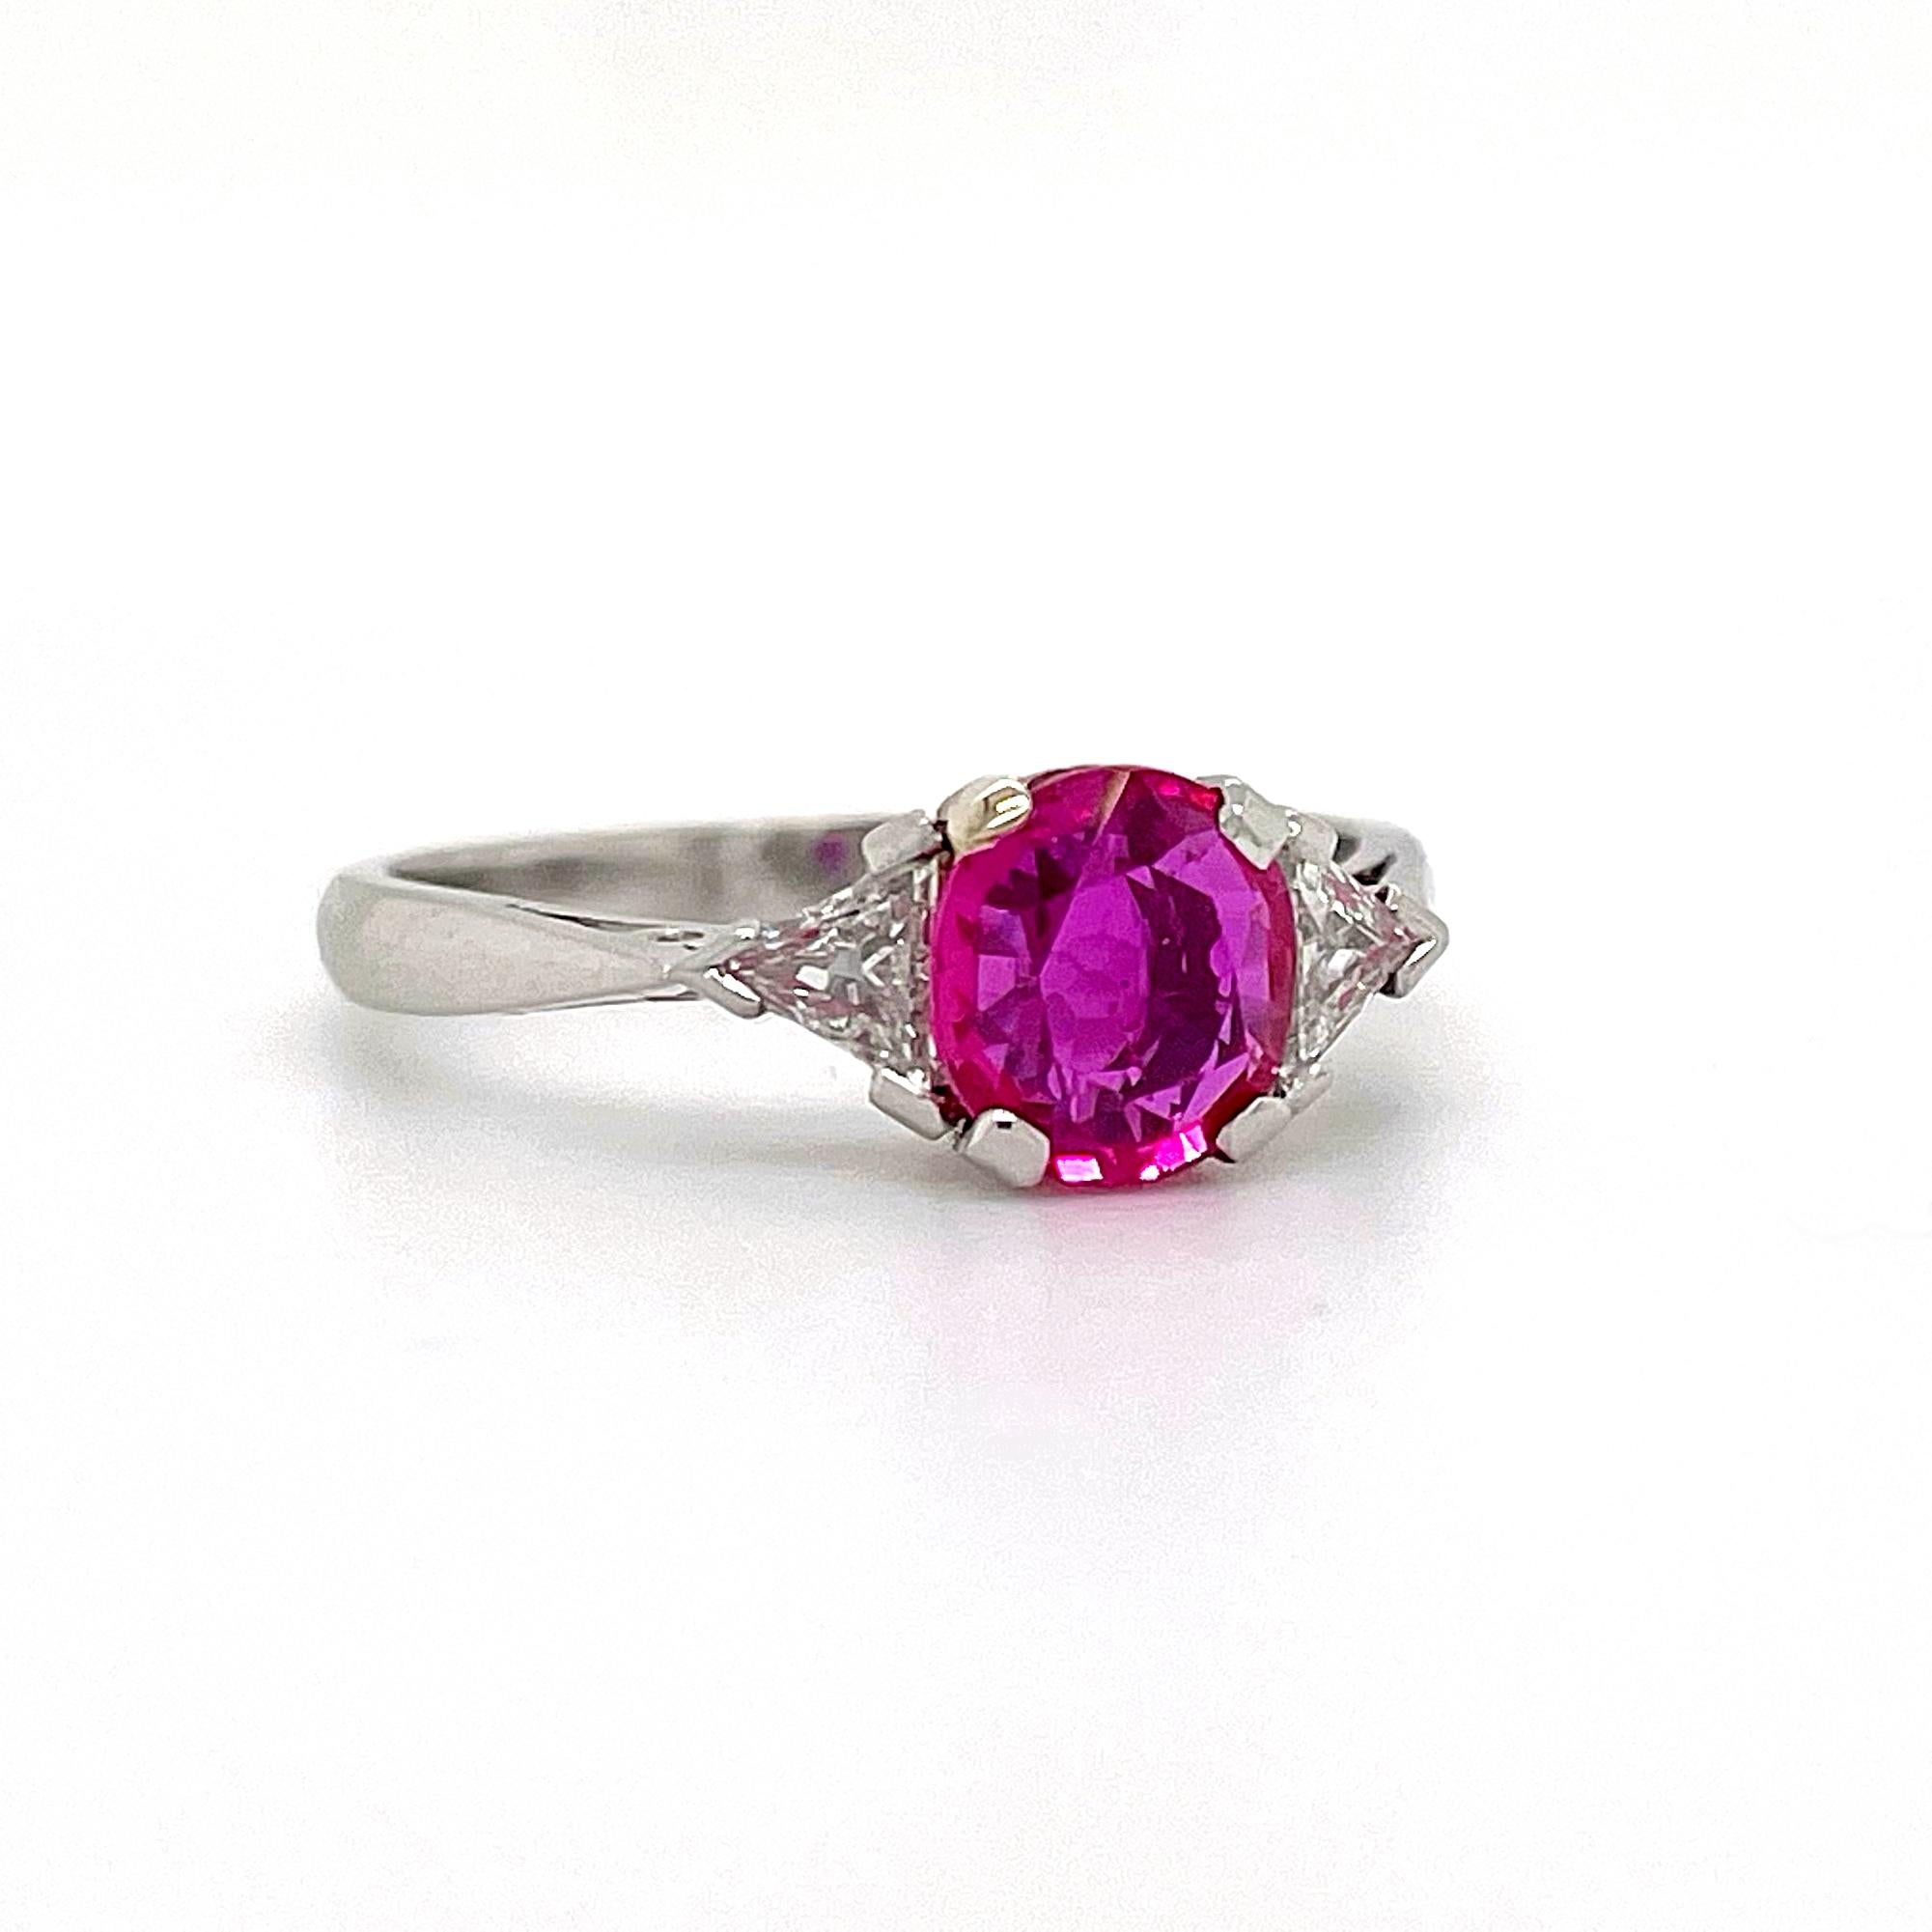 A stunning ruby and diamond ring in platinum. The round shaped ruby has a very bright pinkish colour, vivid crystal and is a very clean gemstone. It weighs approximately 1.2 carats and is probably of Burmese origin. The centre stone is harmoniously